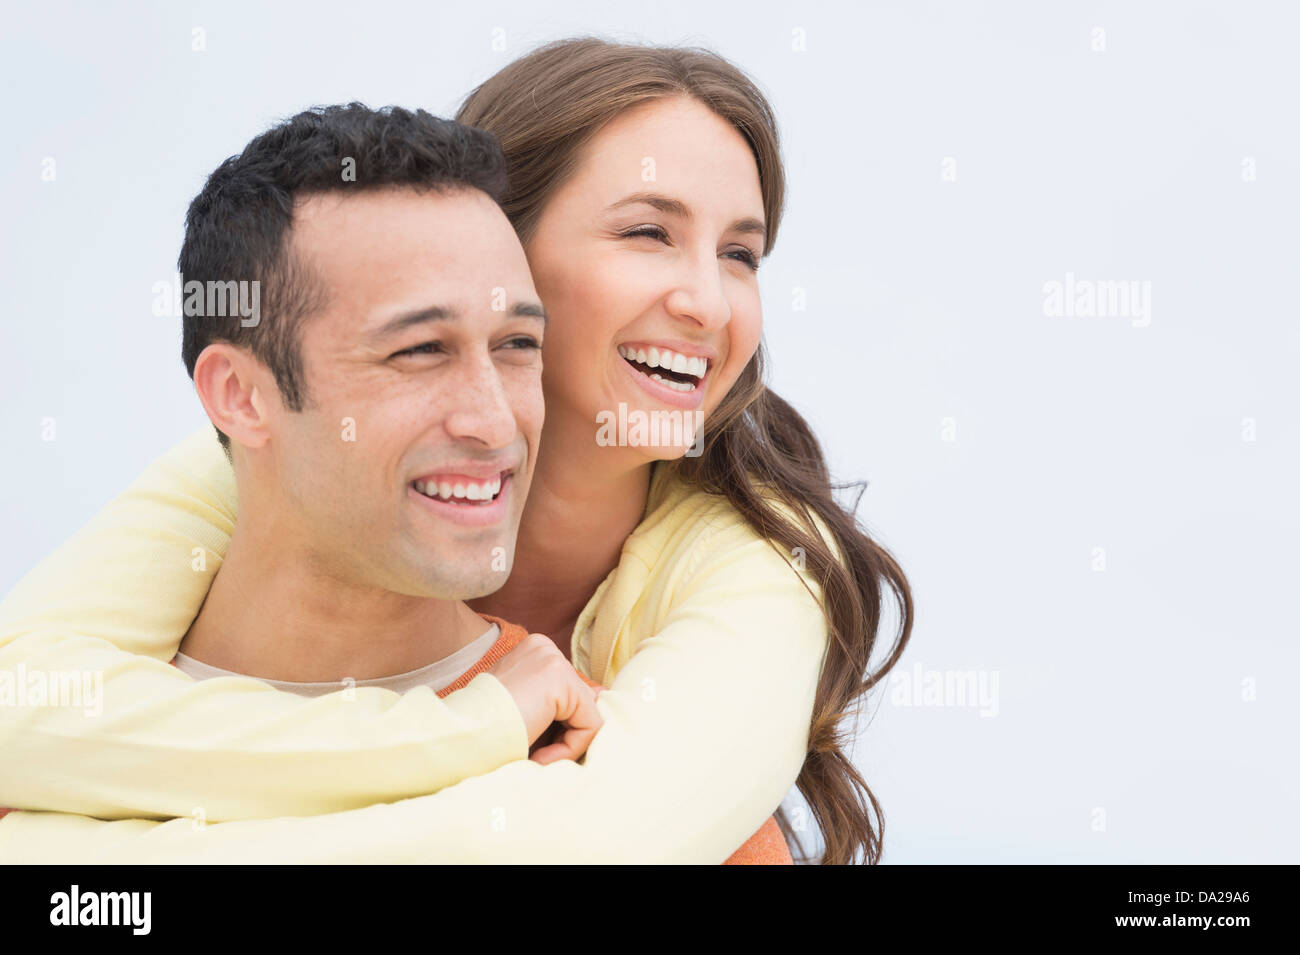 Happy young couple embracing Banque D'Images